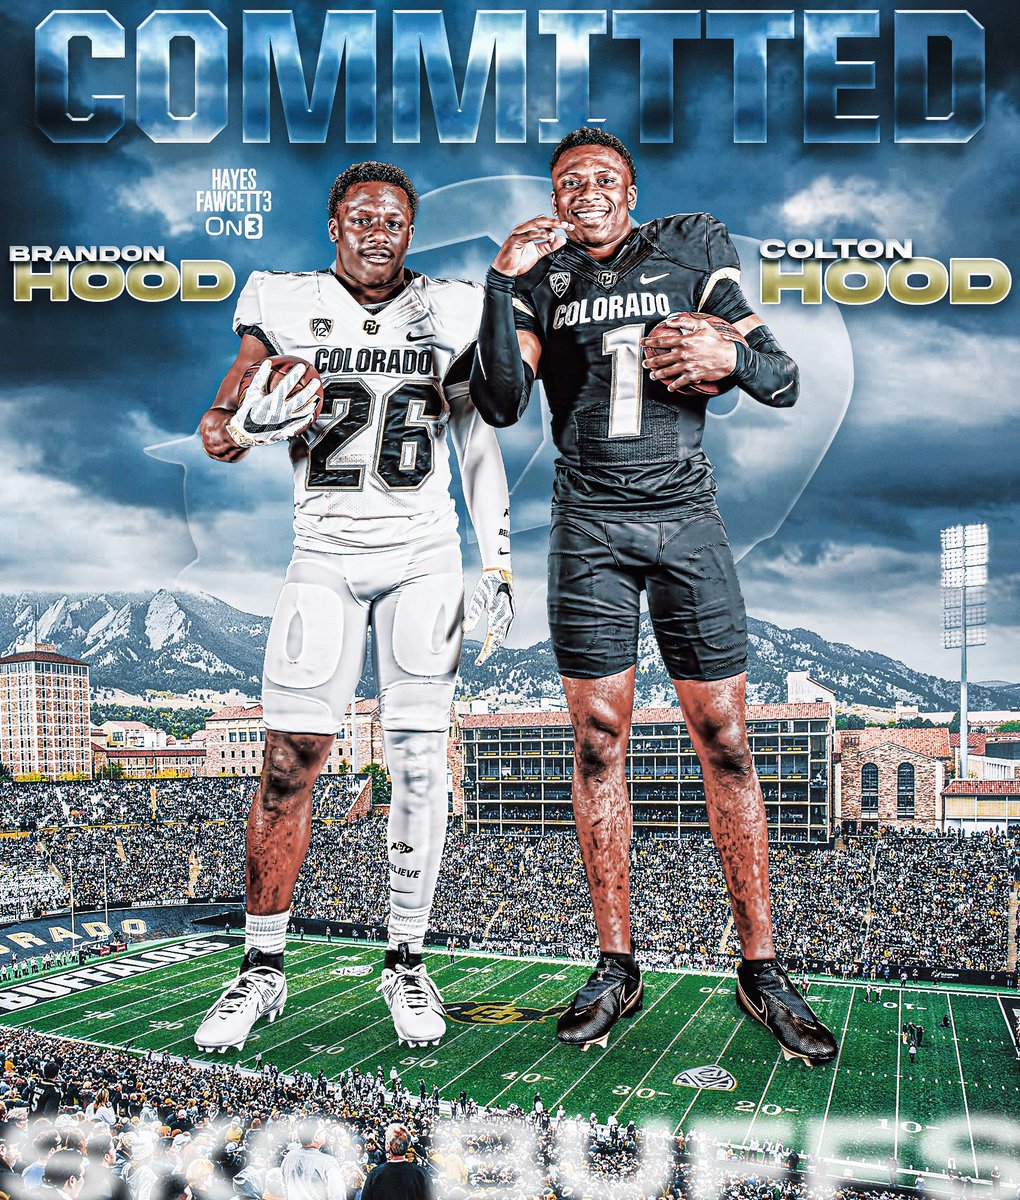 BREAKING: Former Auburn CB Colton Hood and 2024 RB Brandon Hood have Committed to Colorado, they tell @on3sports Colton, a 6’0 195 CB, will have all 4 years of eligibility remaining Brandon, a 5’11 190 RB, held offers from LSU, Tennessee, Auburn, & others